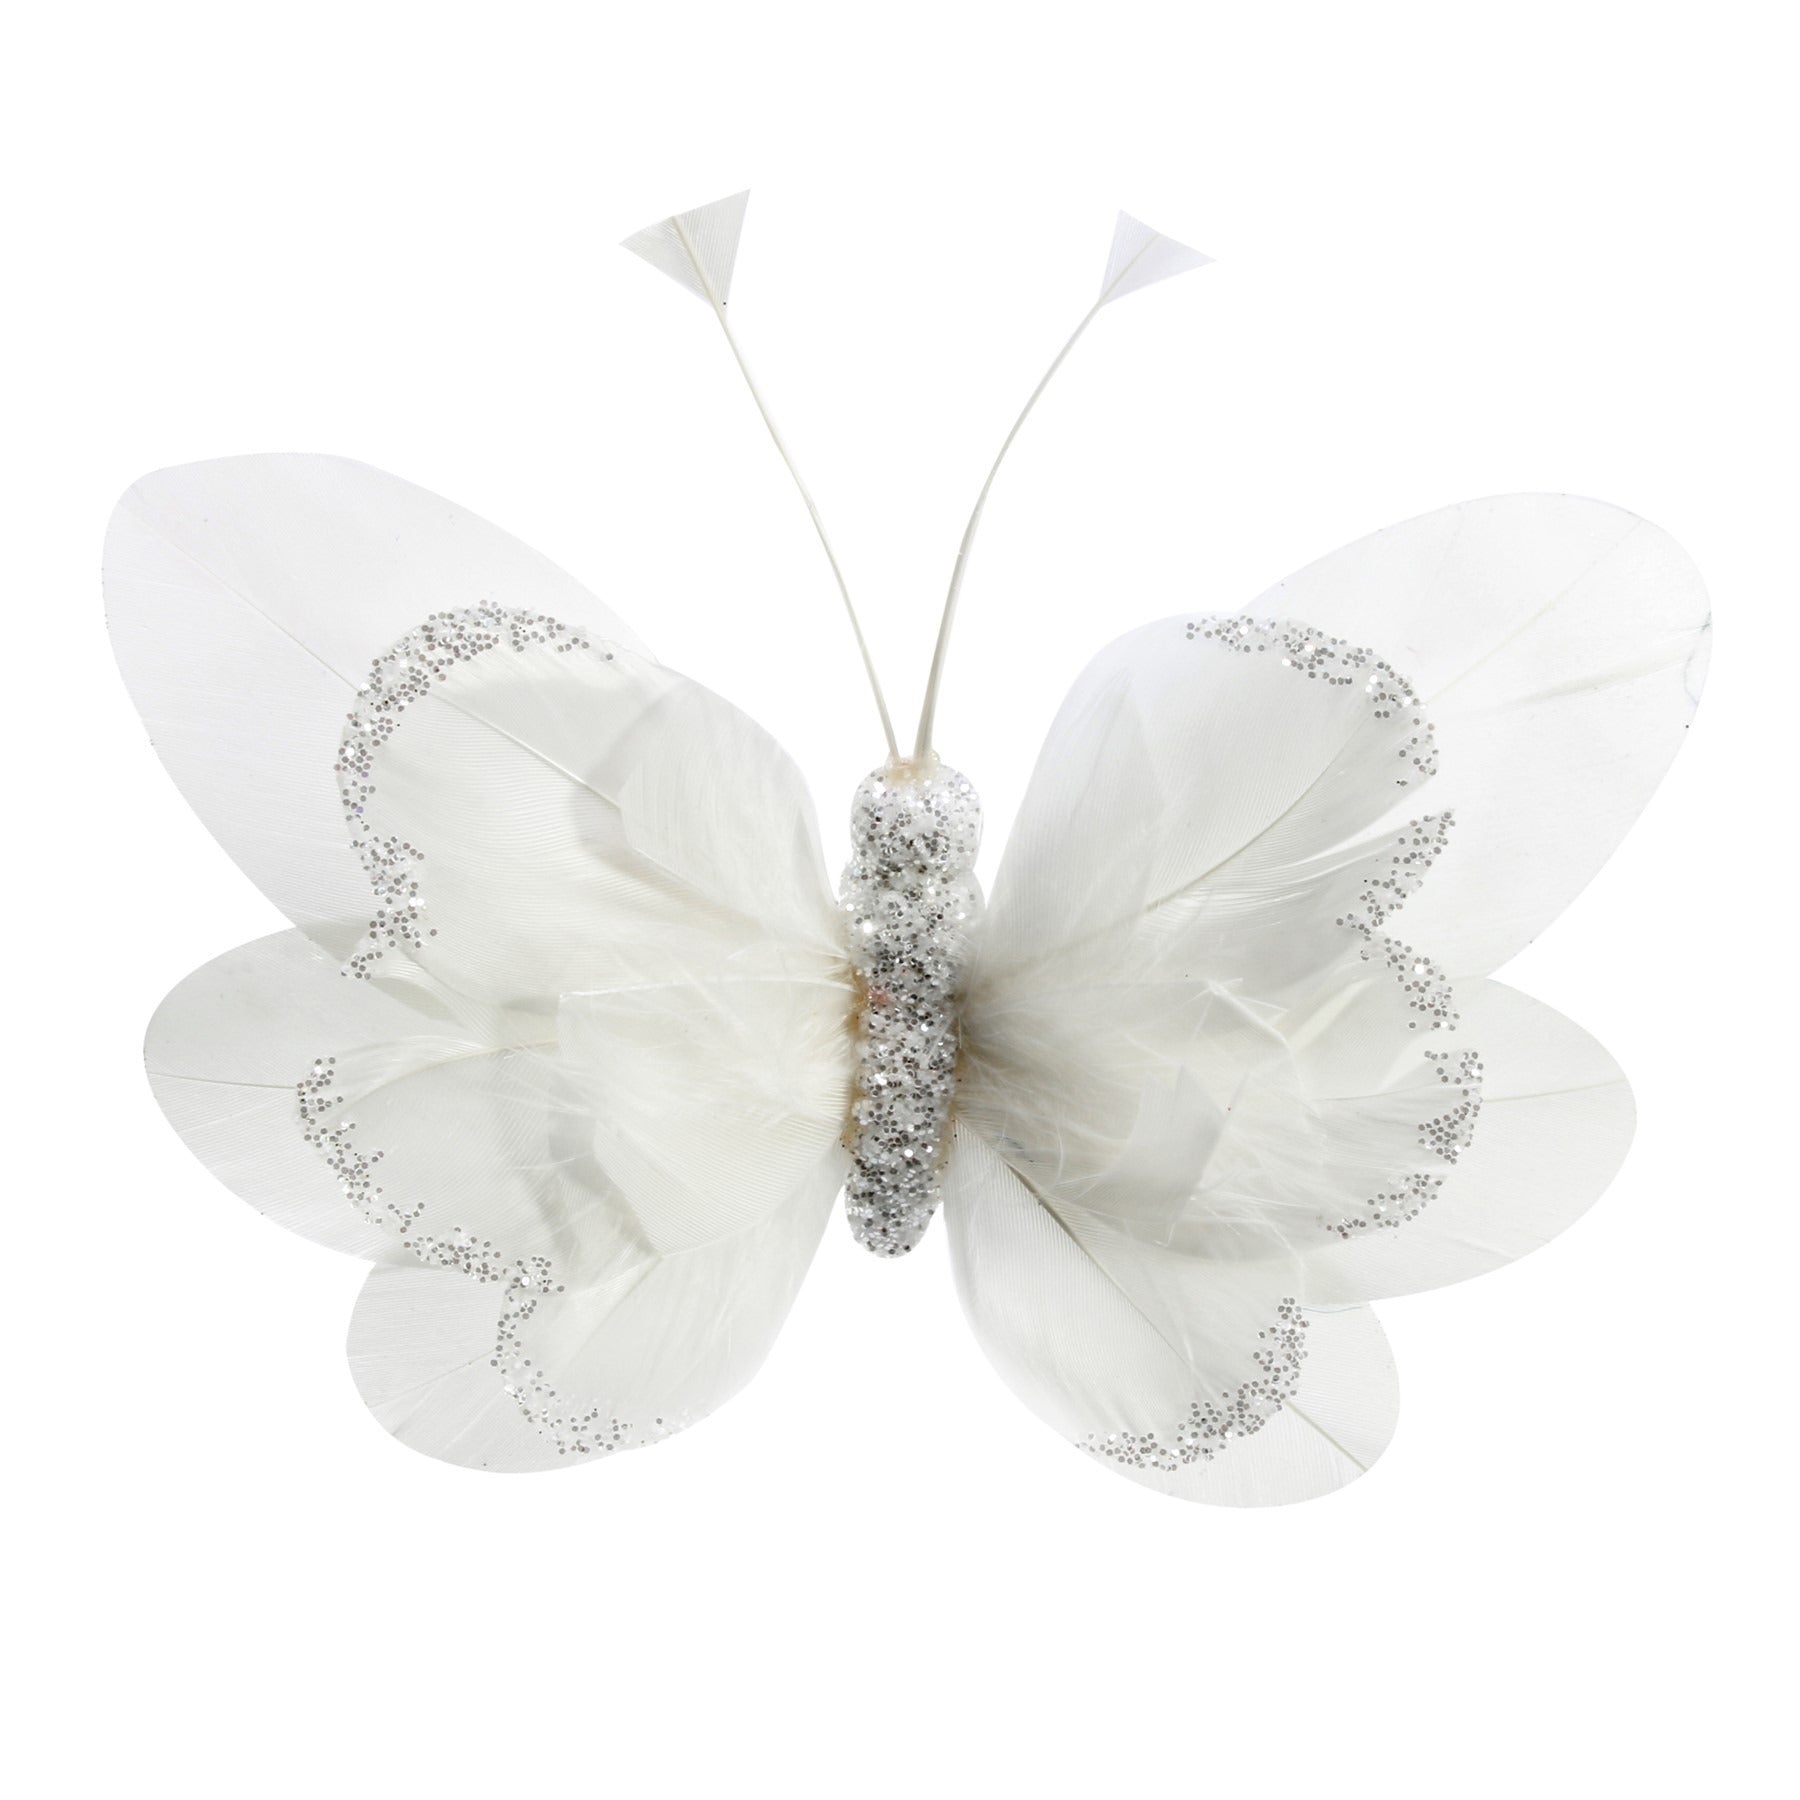 View 14cm White Feather Glitter Butterfly Pack of 6 information